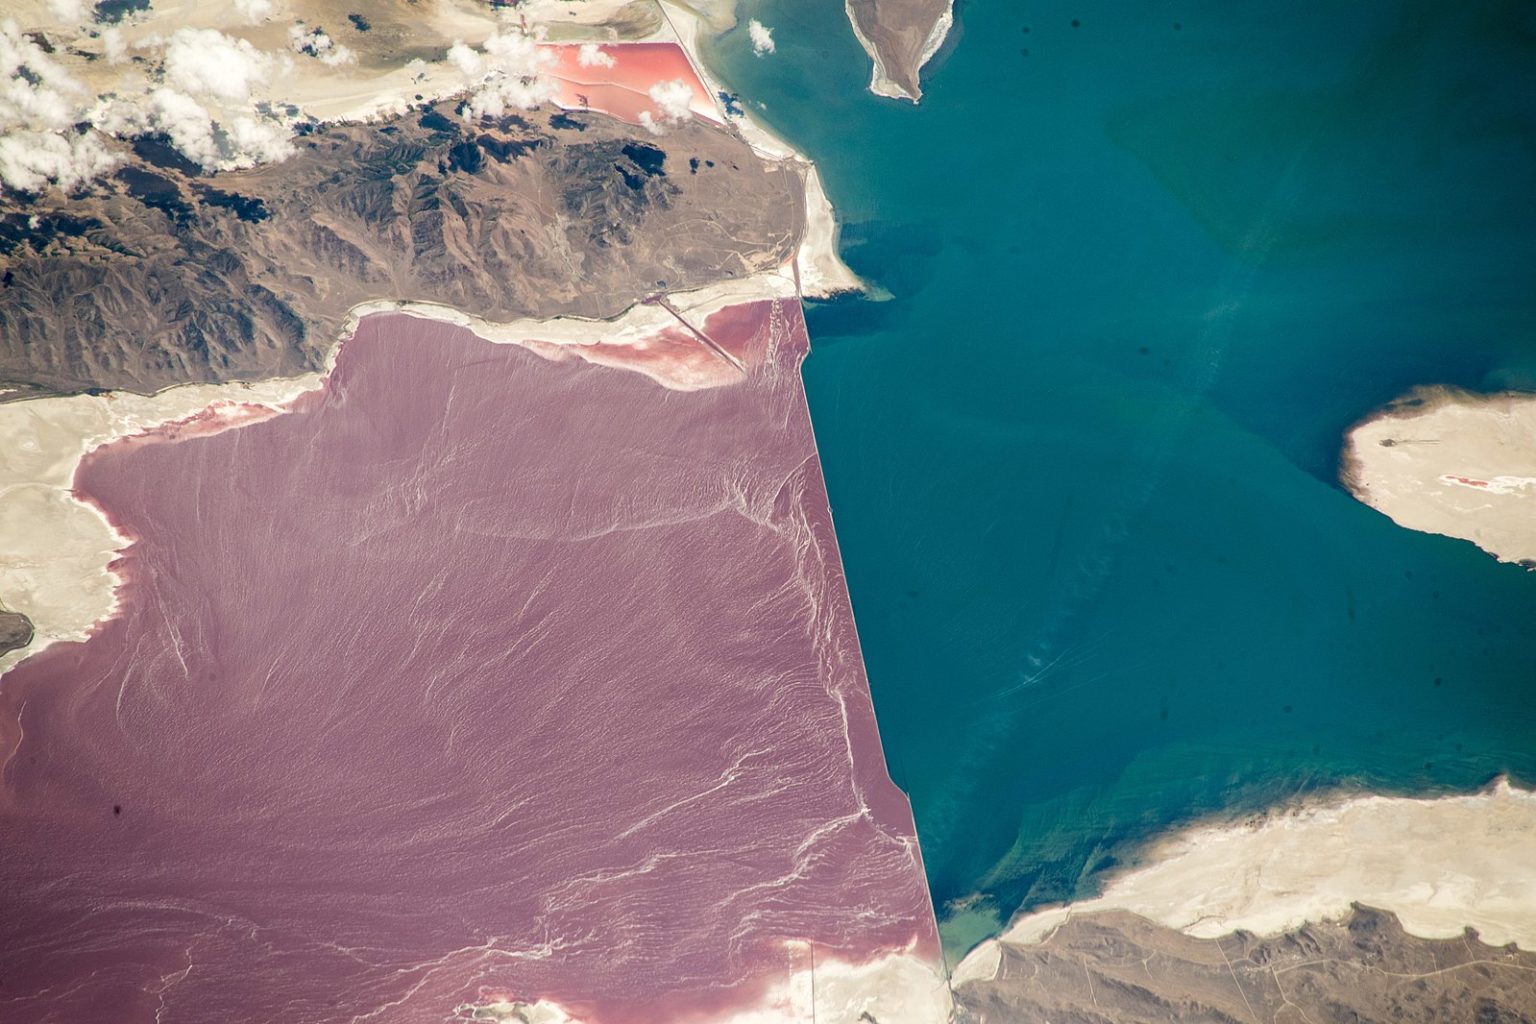 Satellite images showing the color divide caused by human activity in the Great Salt Lake. Photo: A. Gerst / ESA / CC BY-SA 3.0 IGO